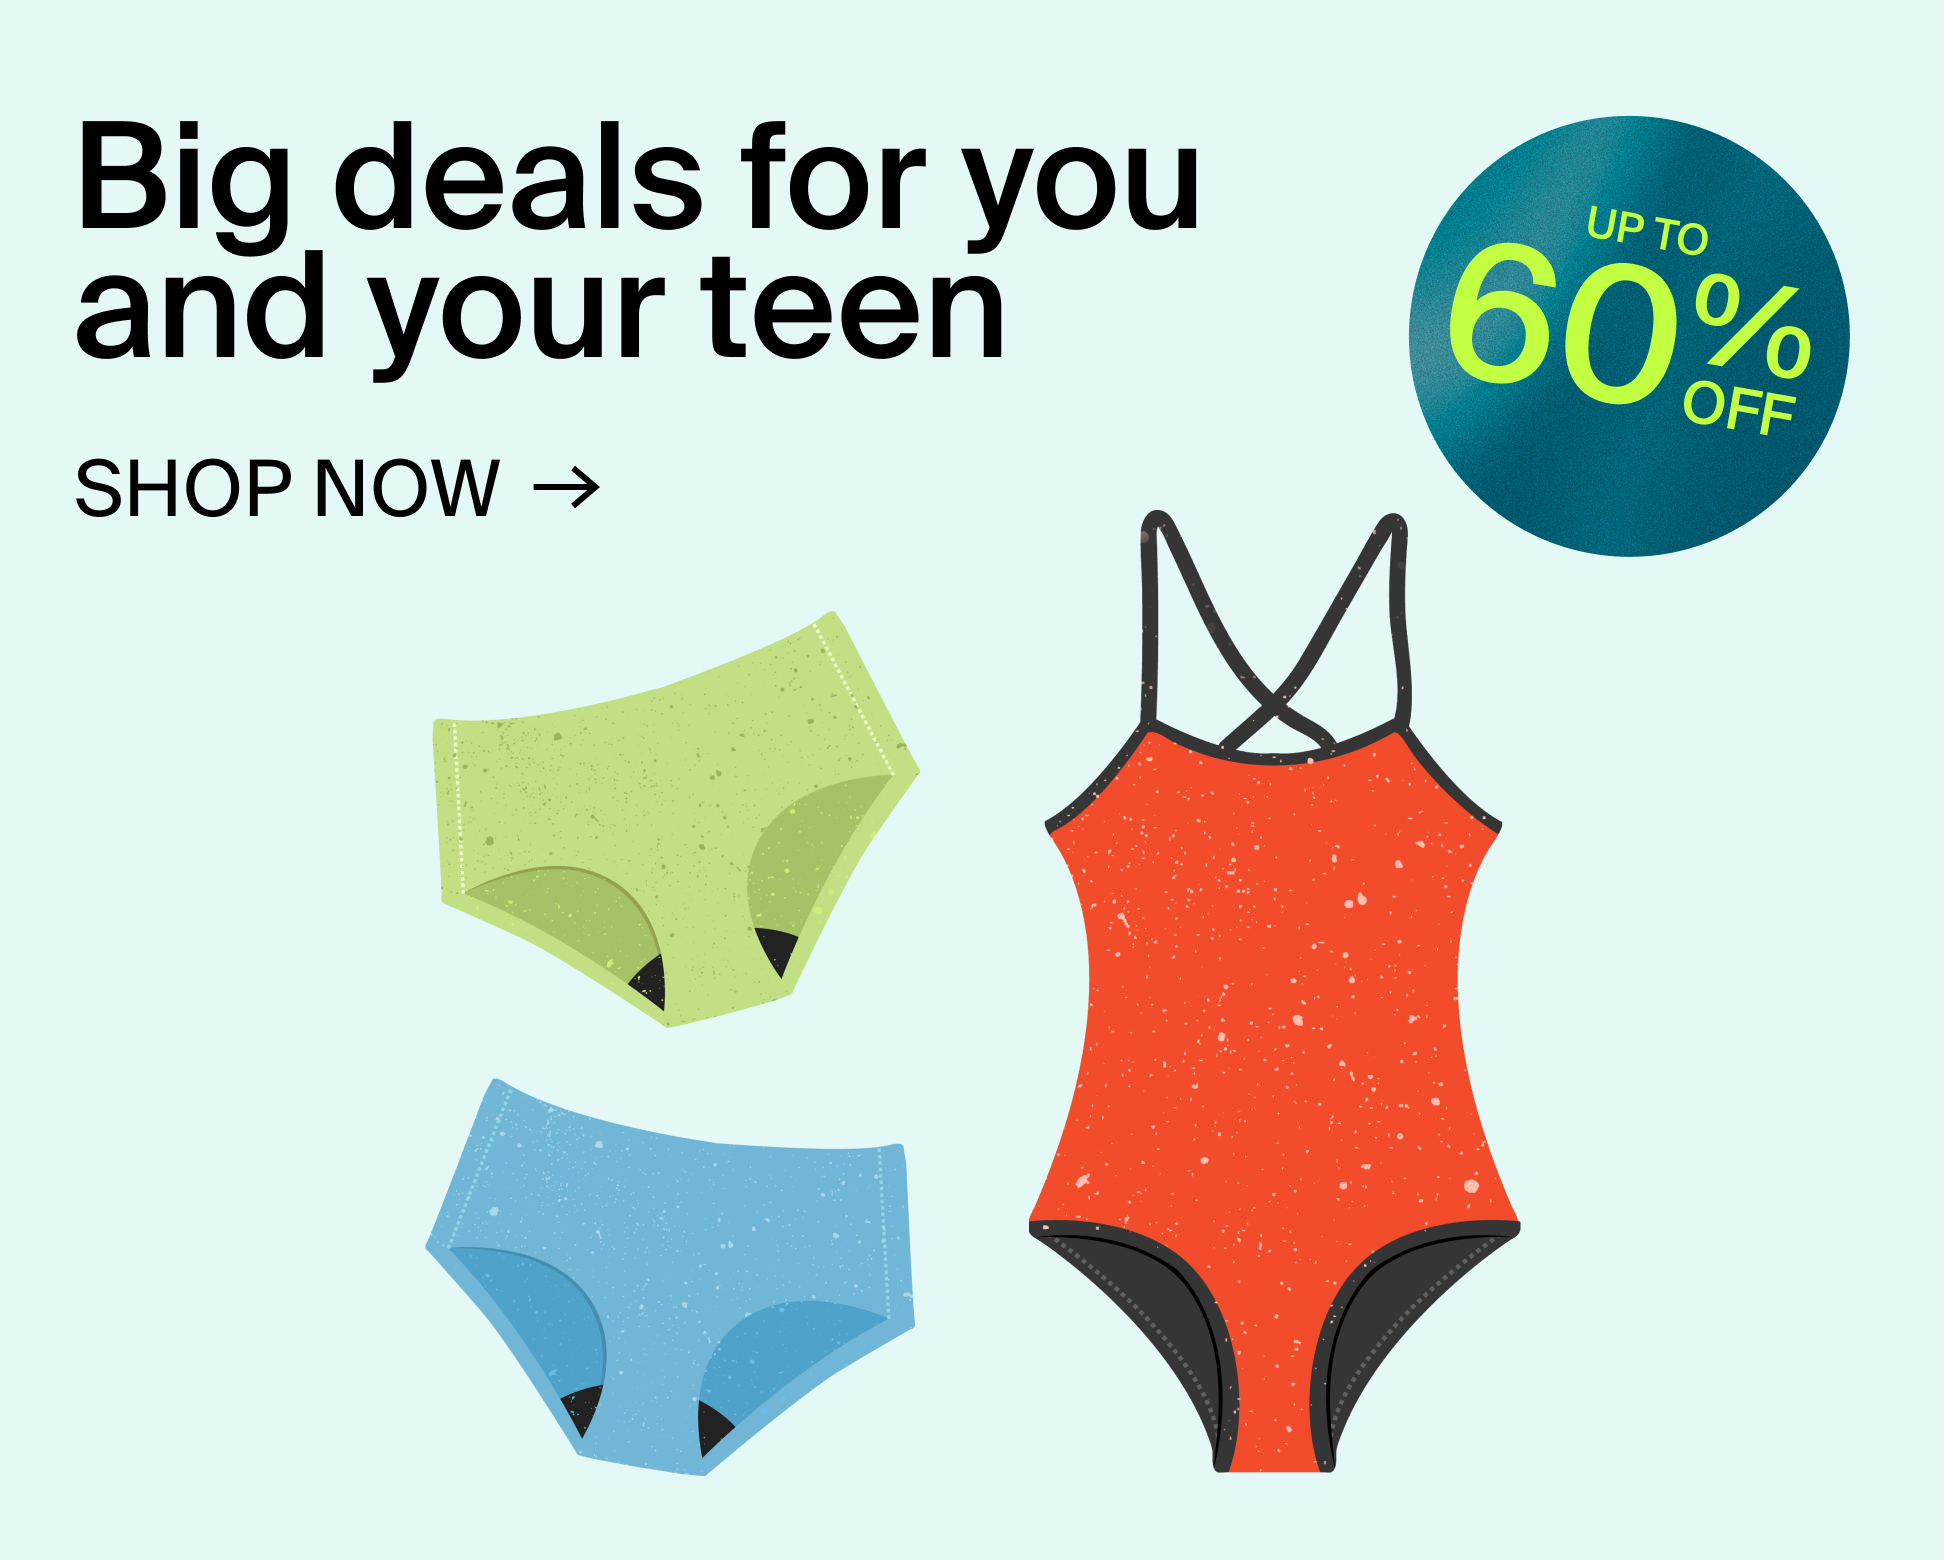 Big deals for you and your teen